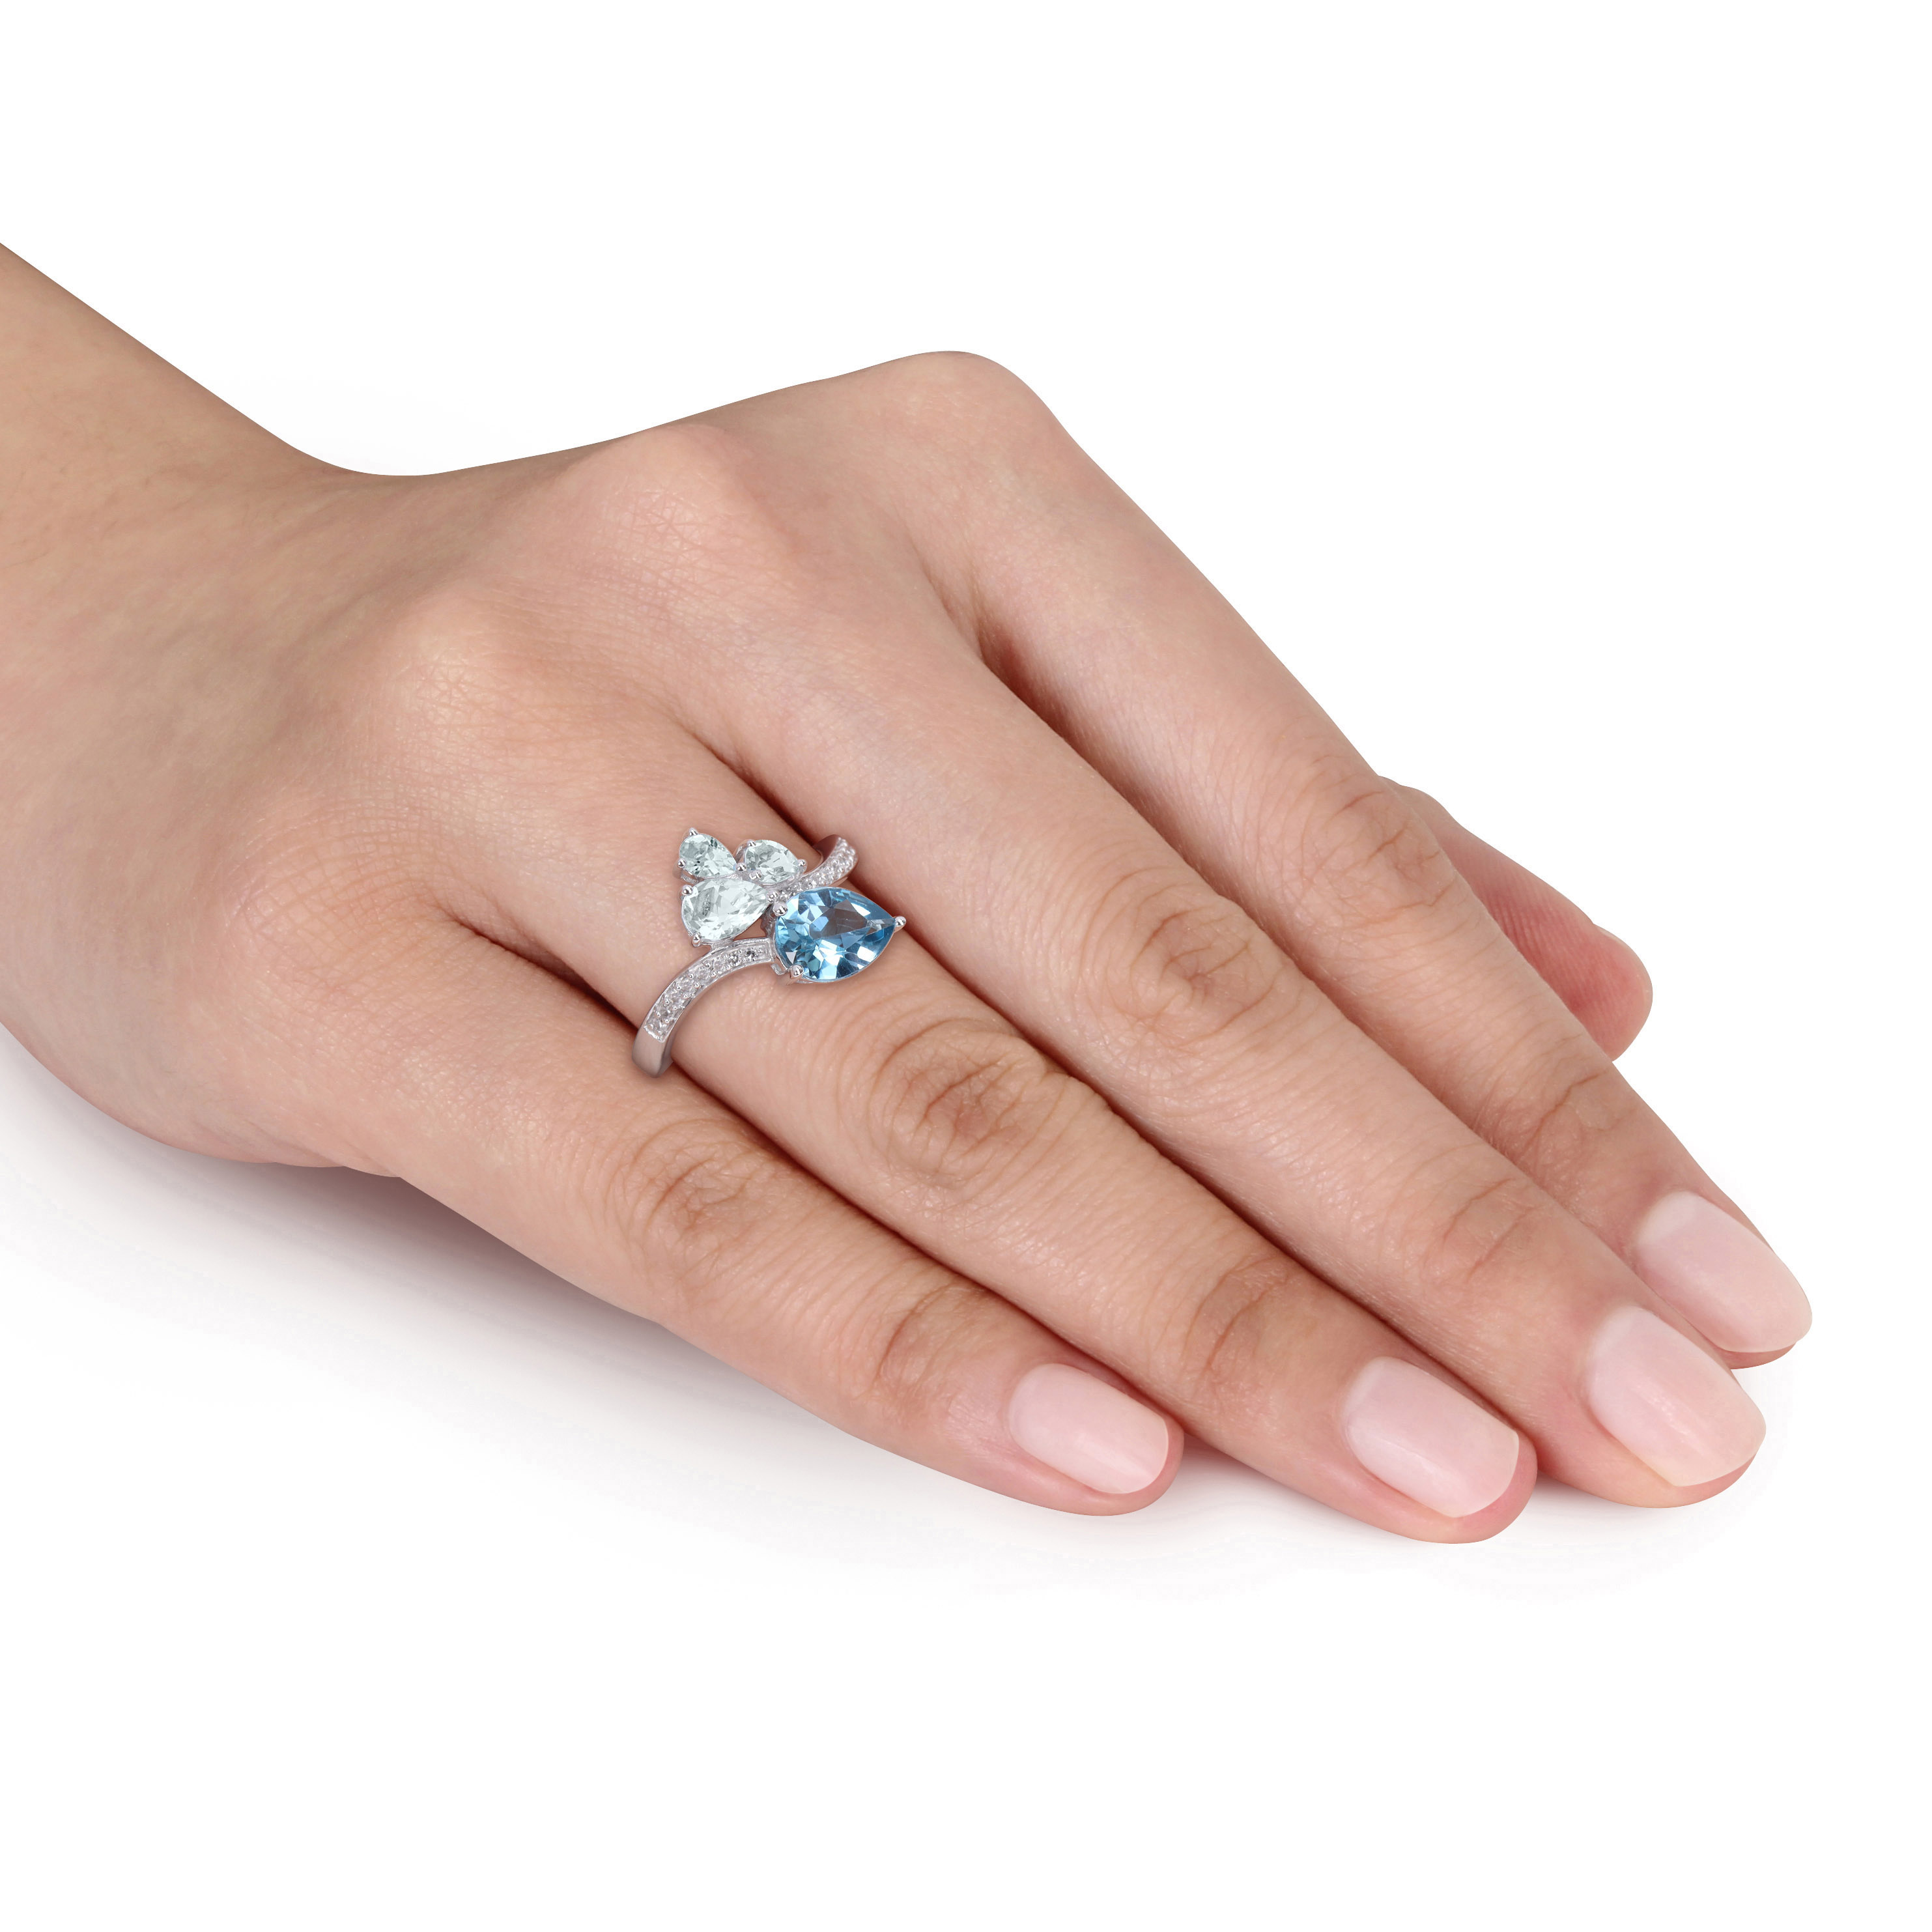 1 7/8 CT TGW Pear-Shape London Blue Topaz and Aquamarine and 1/10 CT TDW Diamond Toi et Moi Ring in 14k White Gold